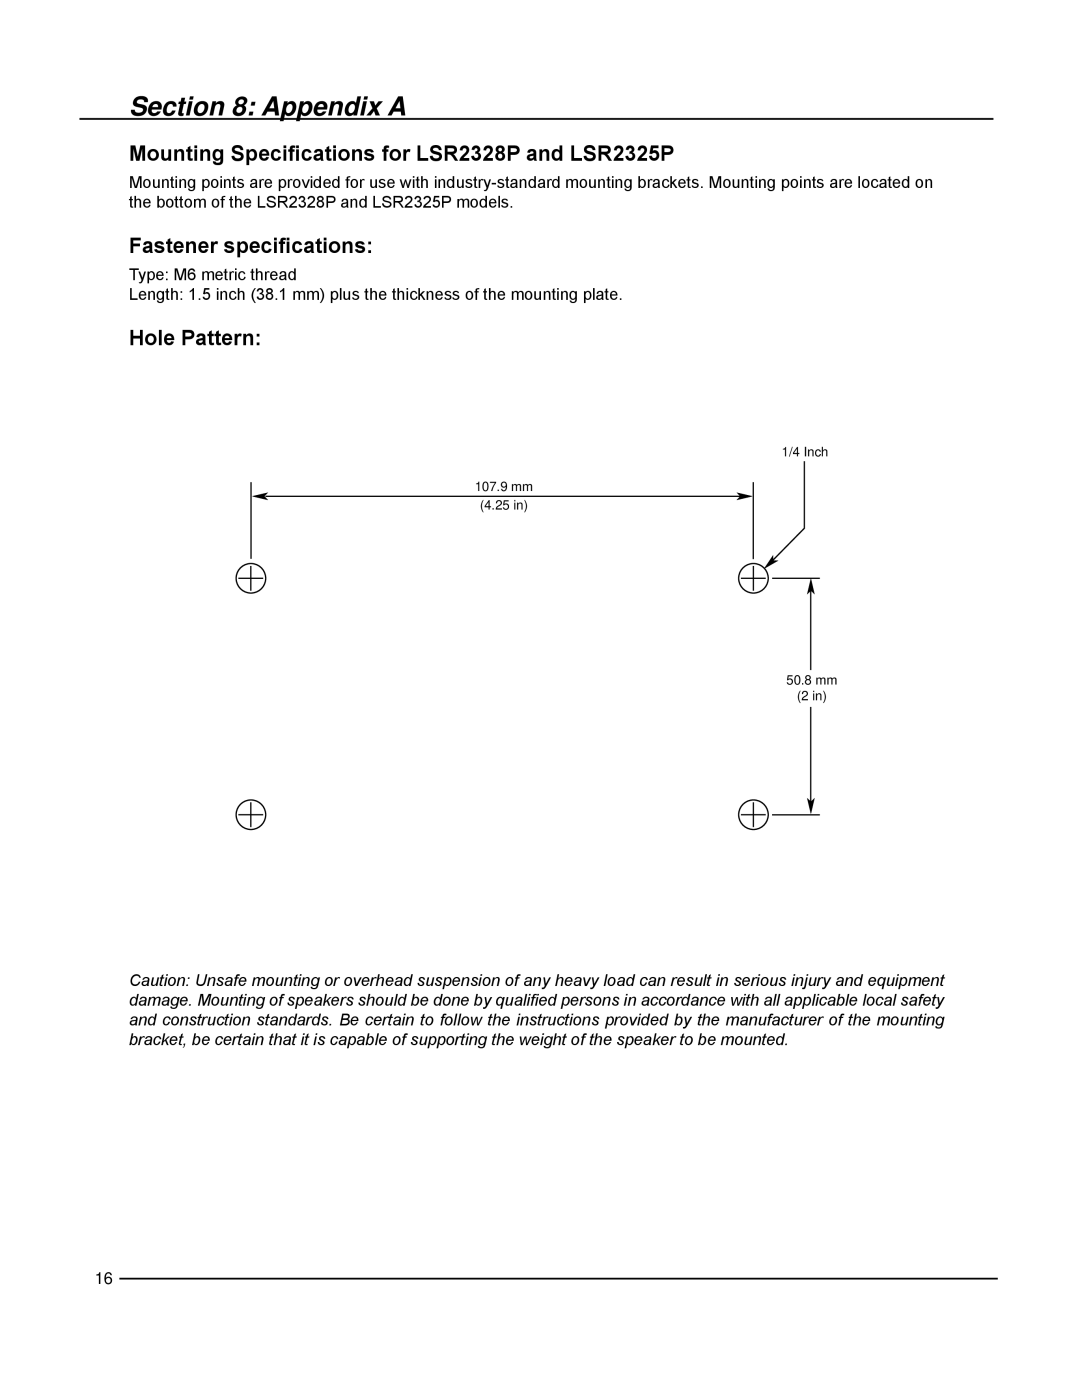 JBL owner manual Appendix A, Mounting Specifications for LSR2328P and LSR2325P, Fastener specifications, Hole Pattern 